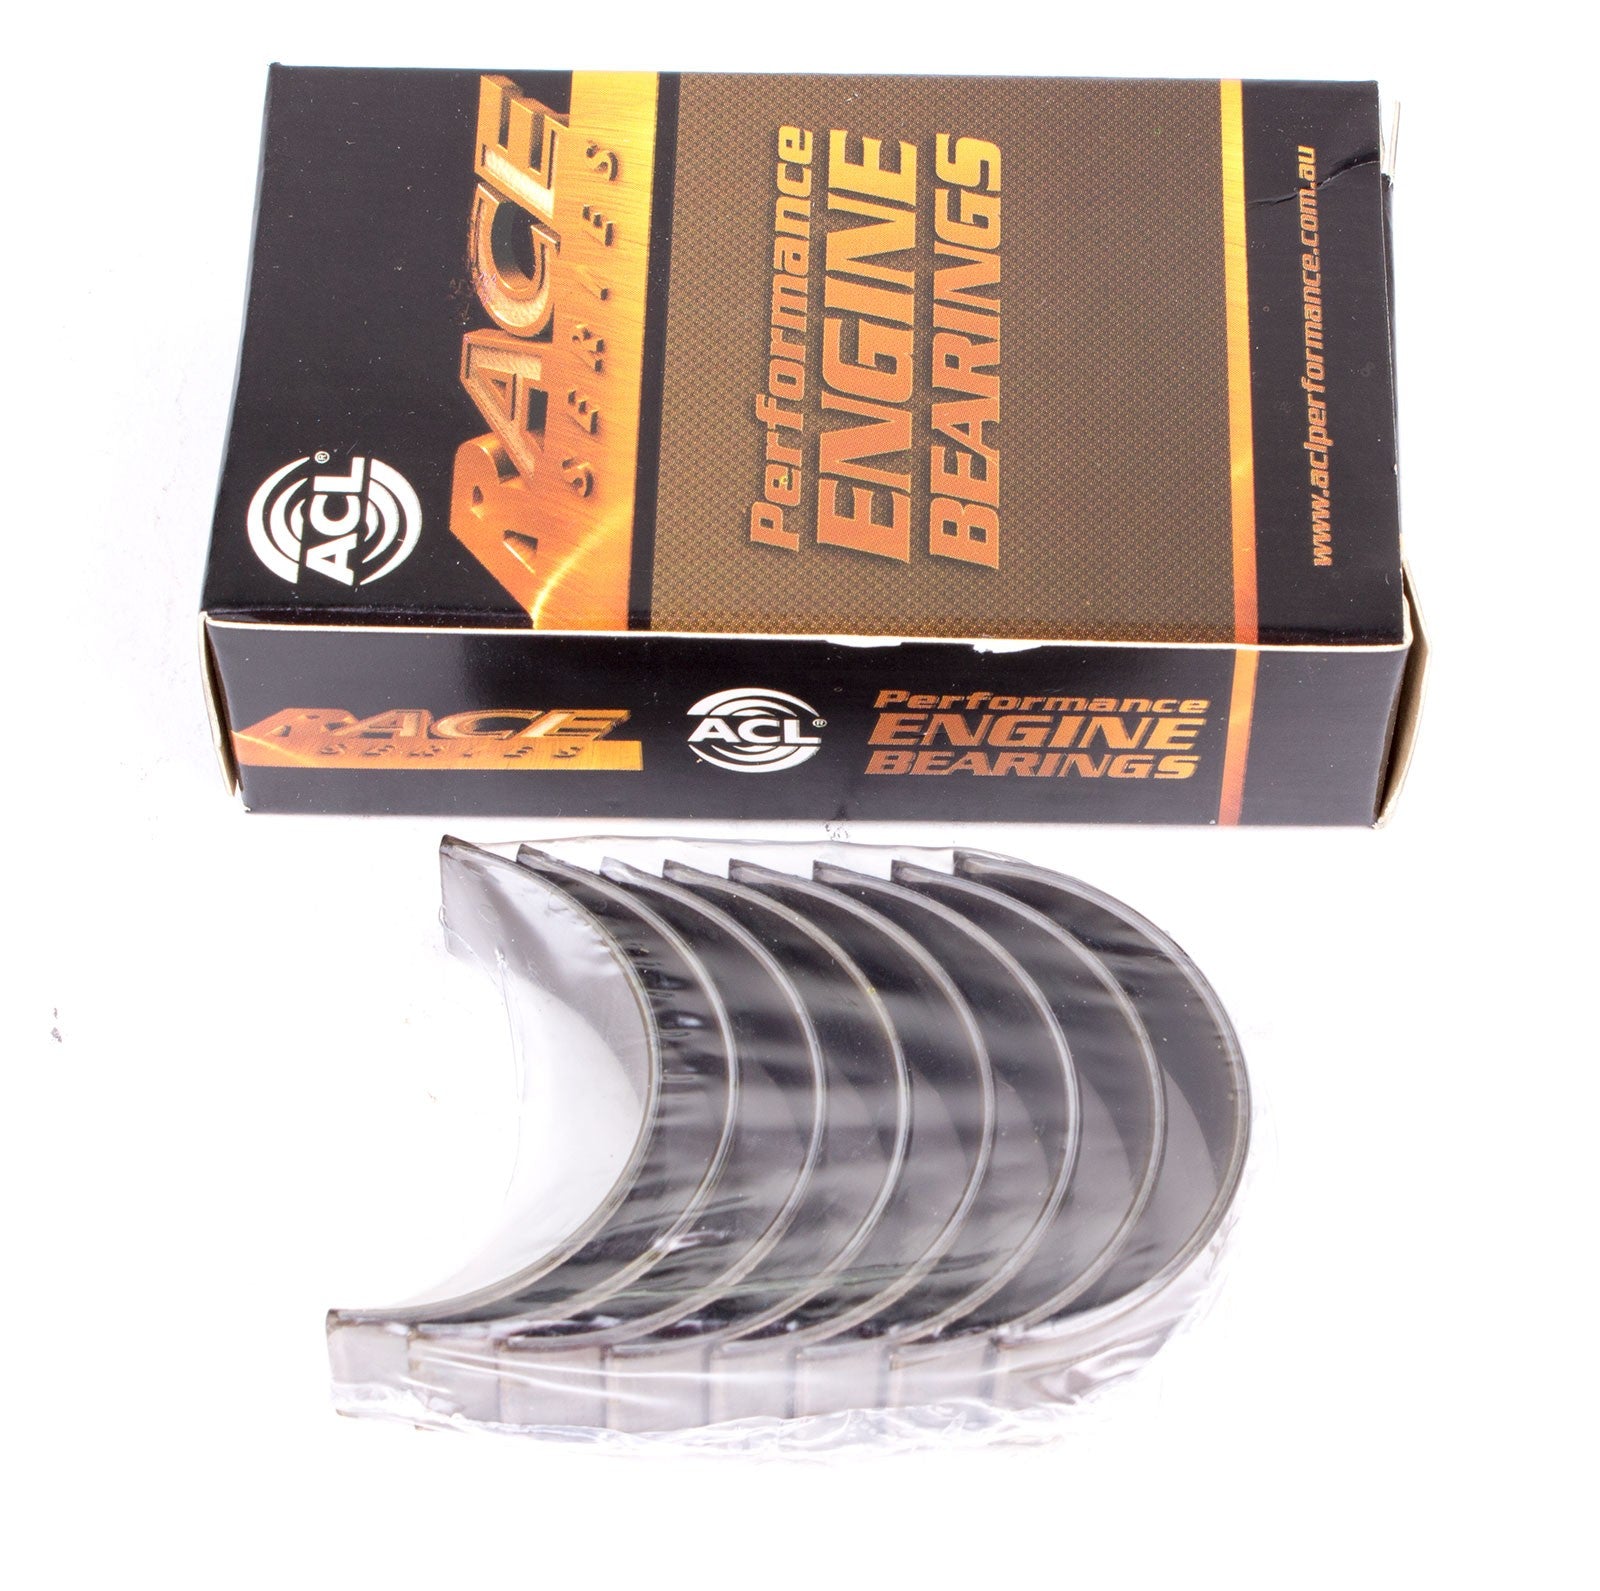 ACL 5M7788H-.025 Main bearing set (ACL Race Series) Photo-0 